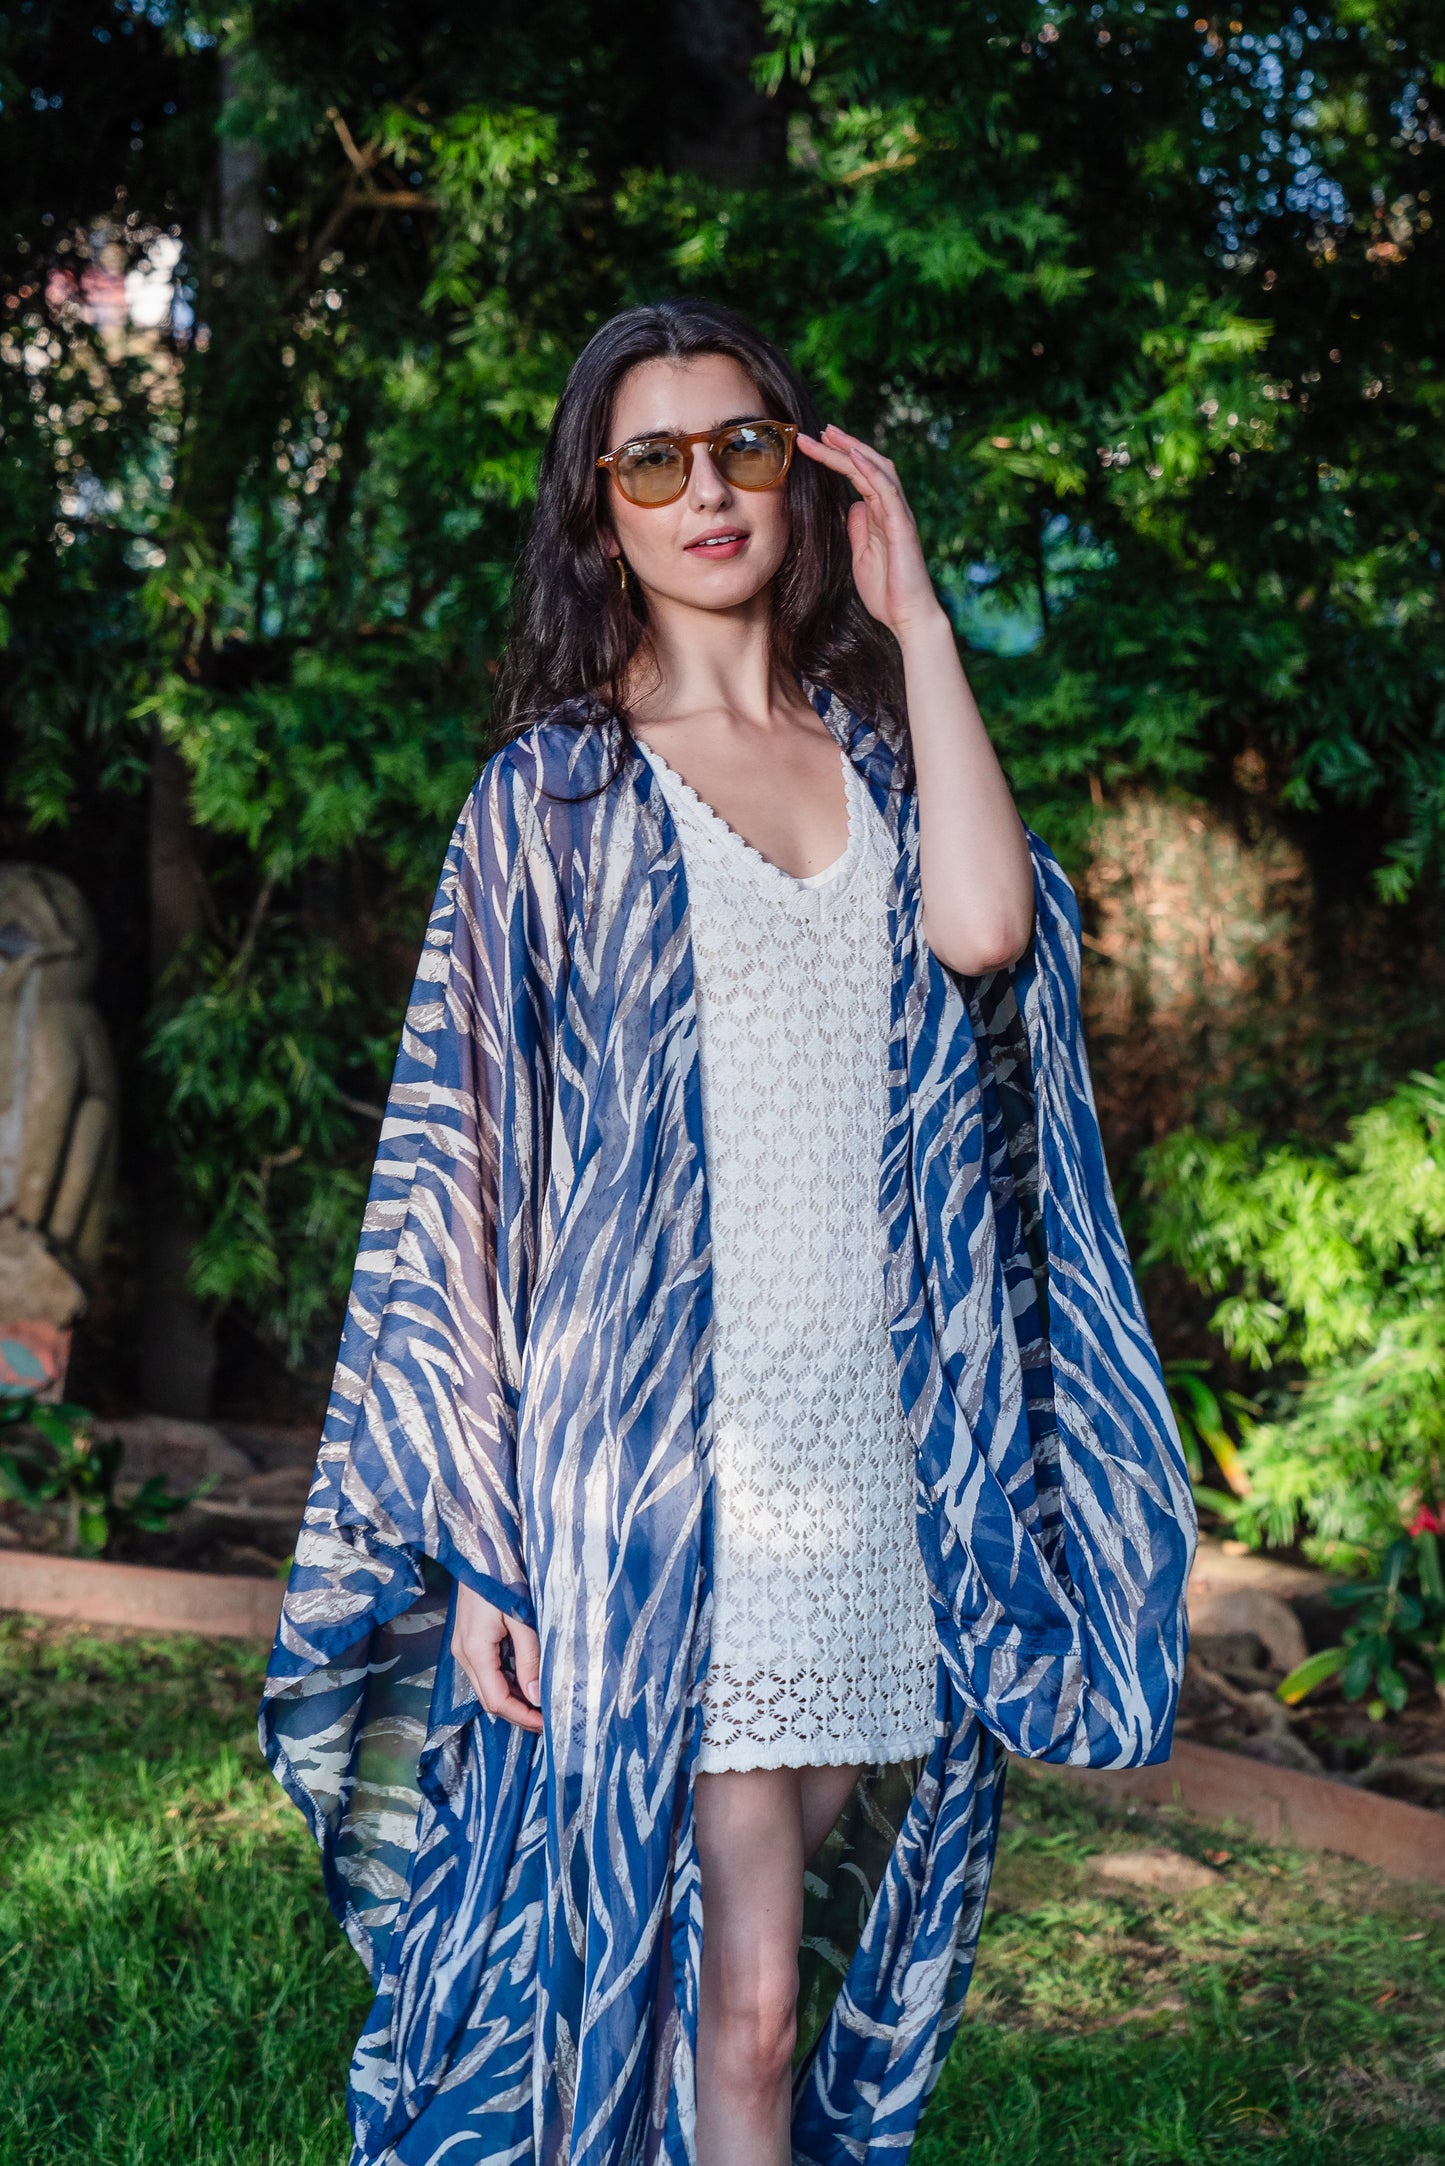  Blue zebra print kimono with belt. Can be worn open as a robe or wrap dress. Long flowy sleeves with ankle hem. Made from semi sheer rayon chiffon fabric.